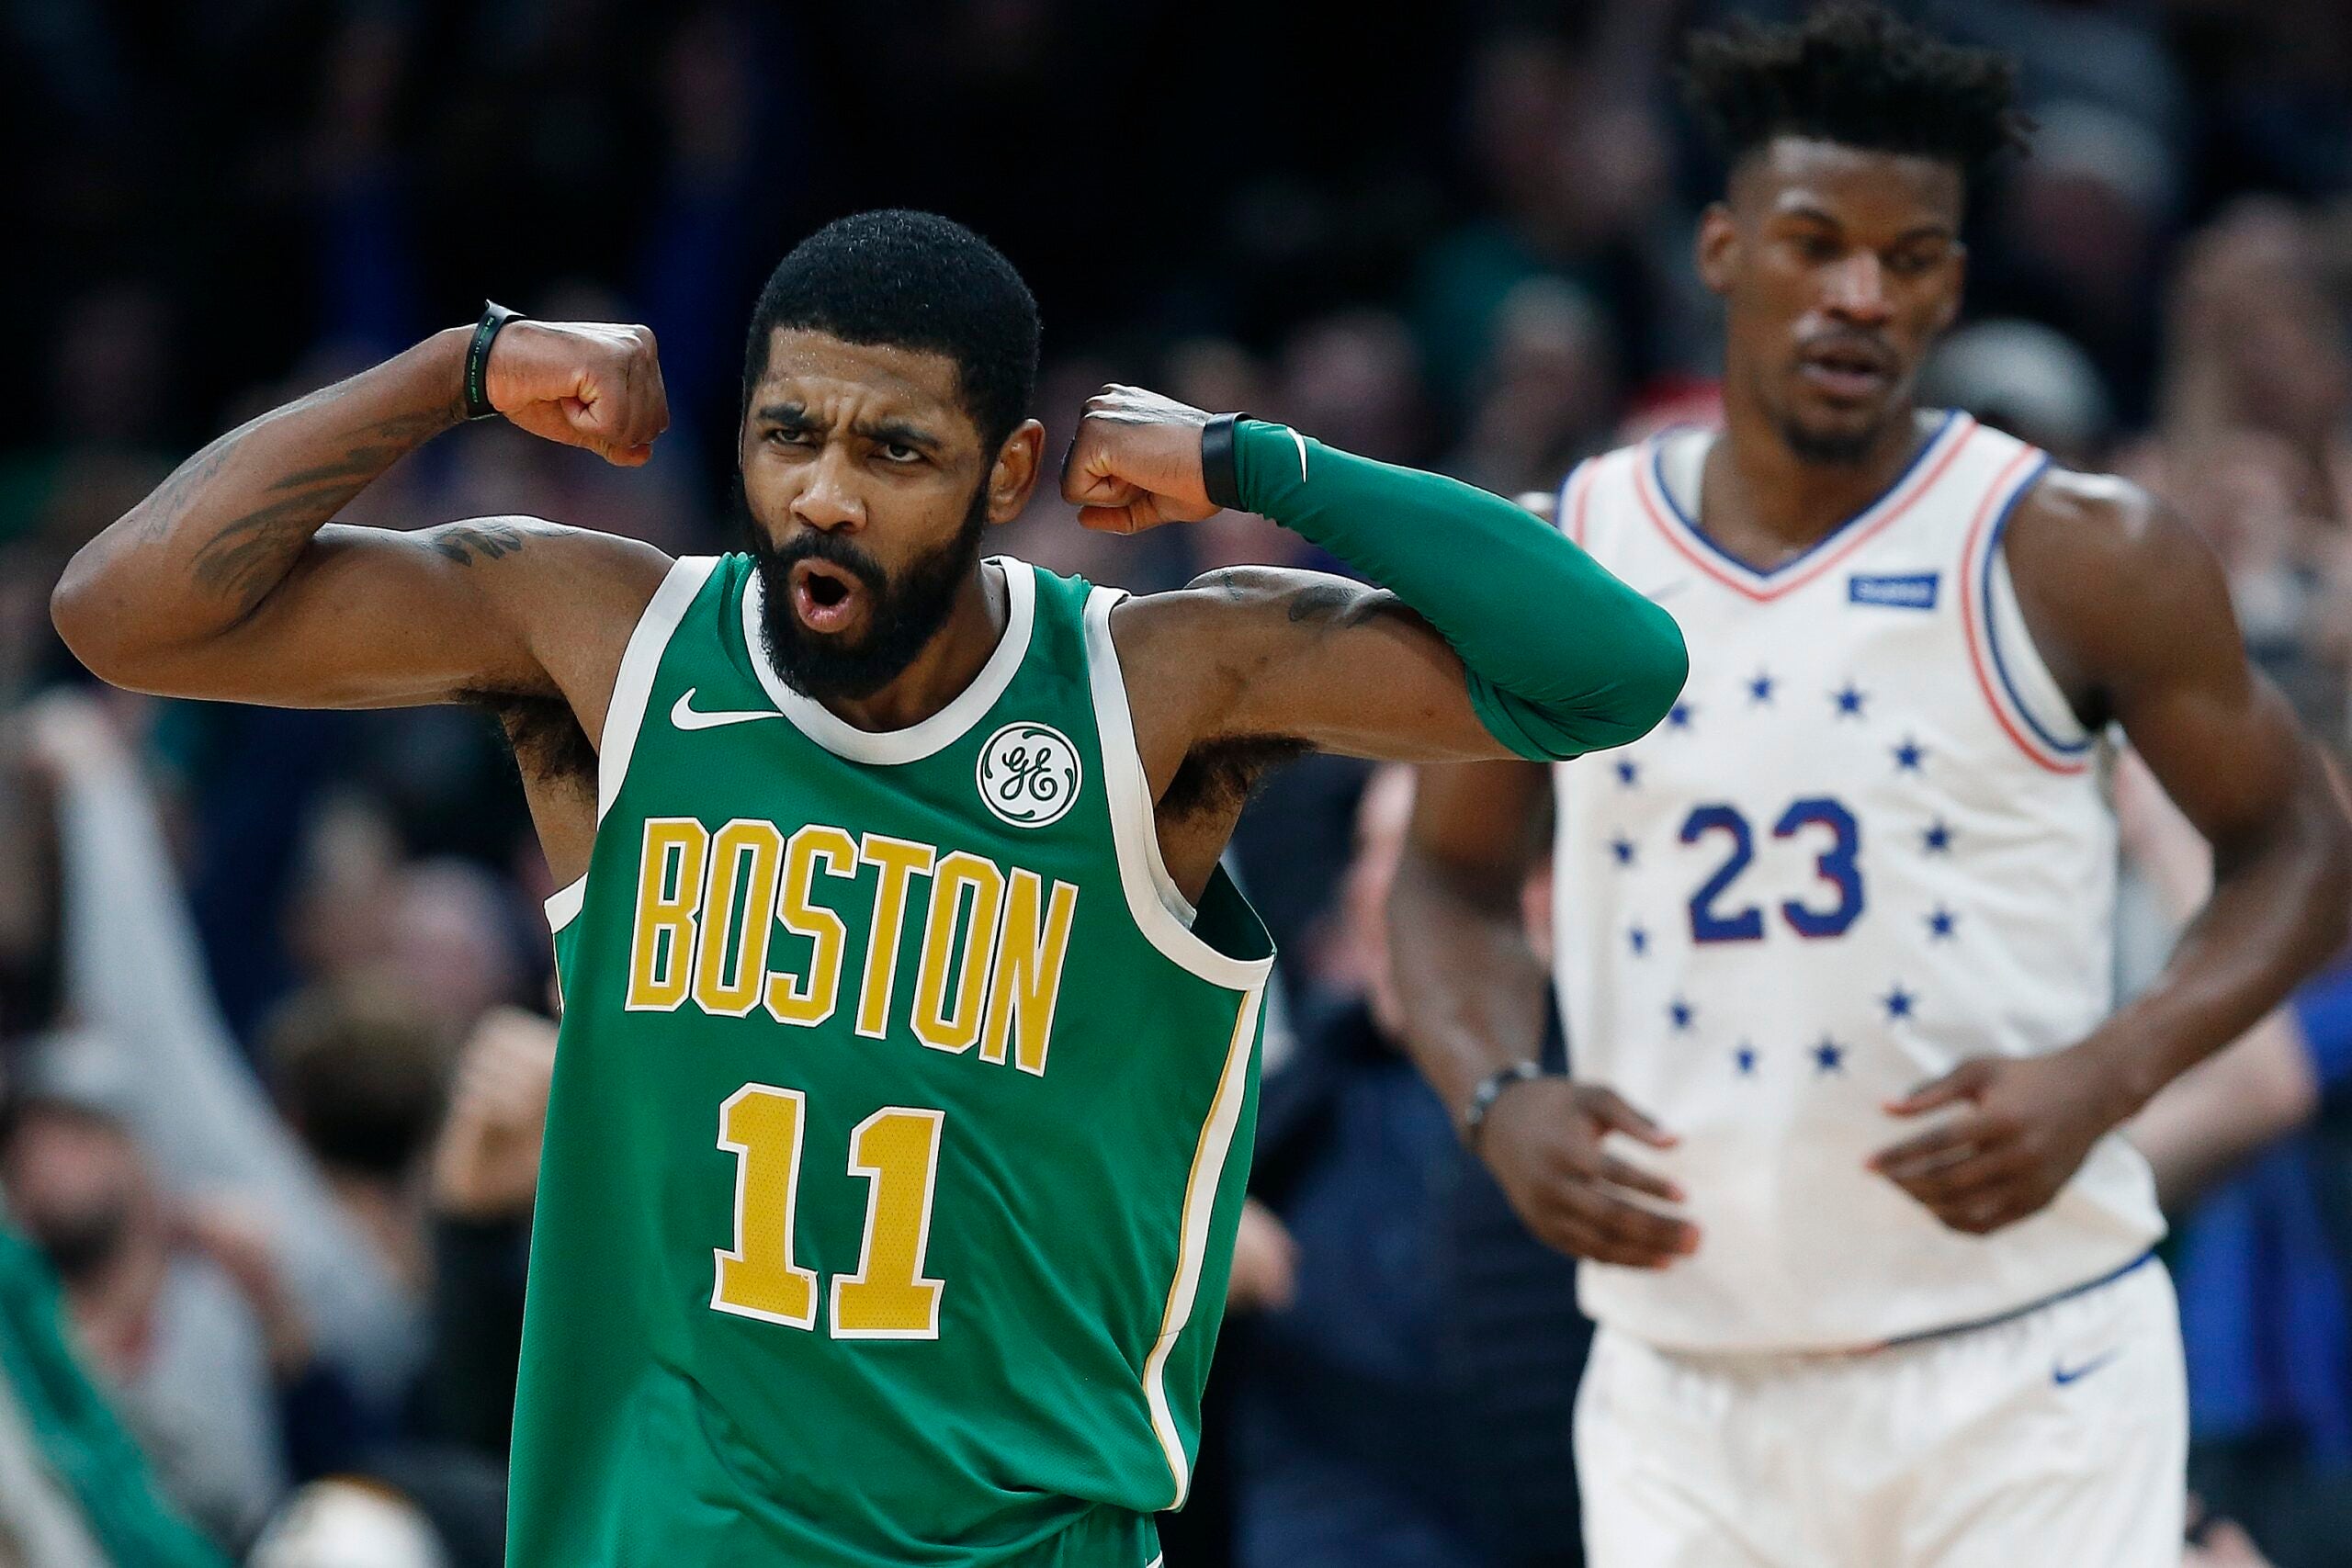 Sign of respect? Celtics to play at Garden on Christmas Day